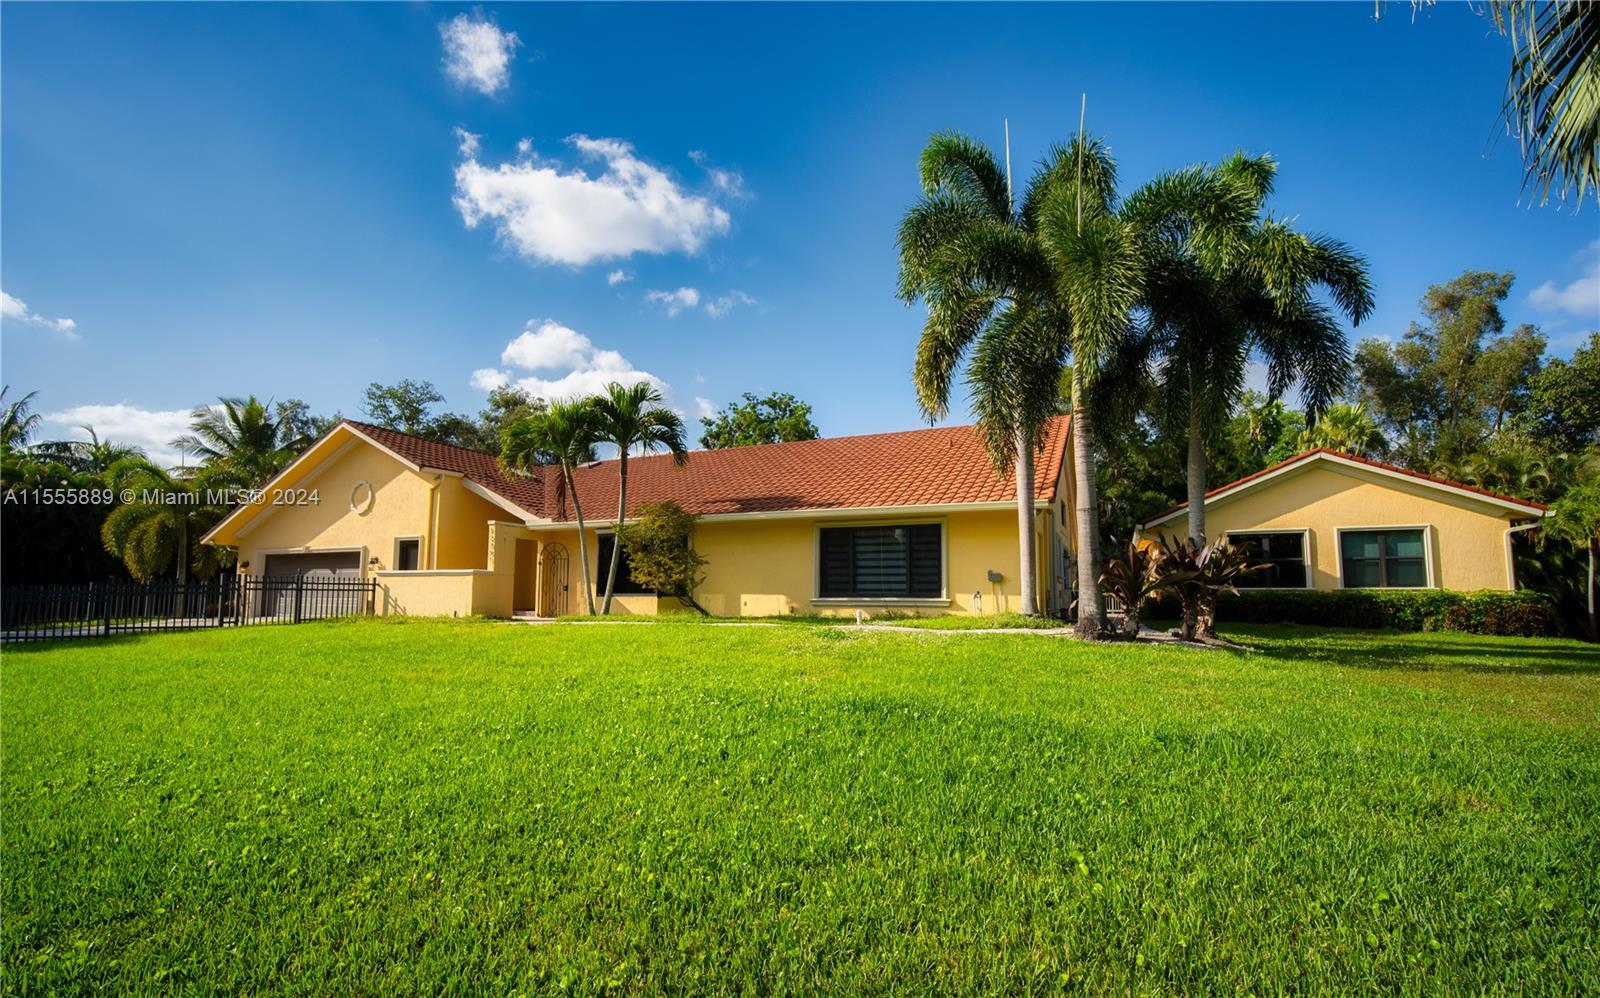 12351 Nw 2nd St St, Plantation, Miami-Dade County, Florida - 6 Bedrooms  
4 Bathrooms - 